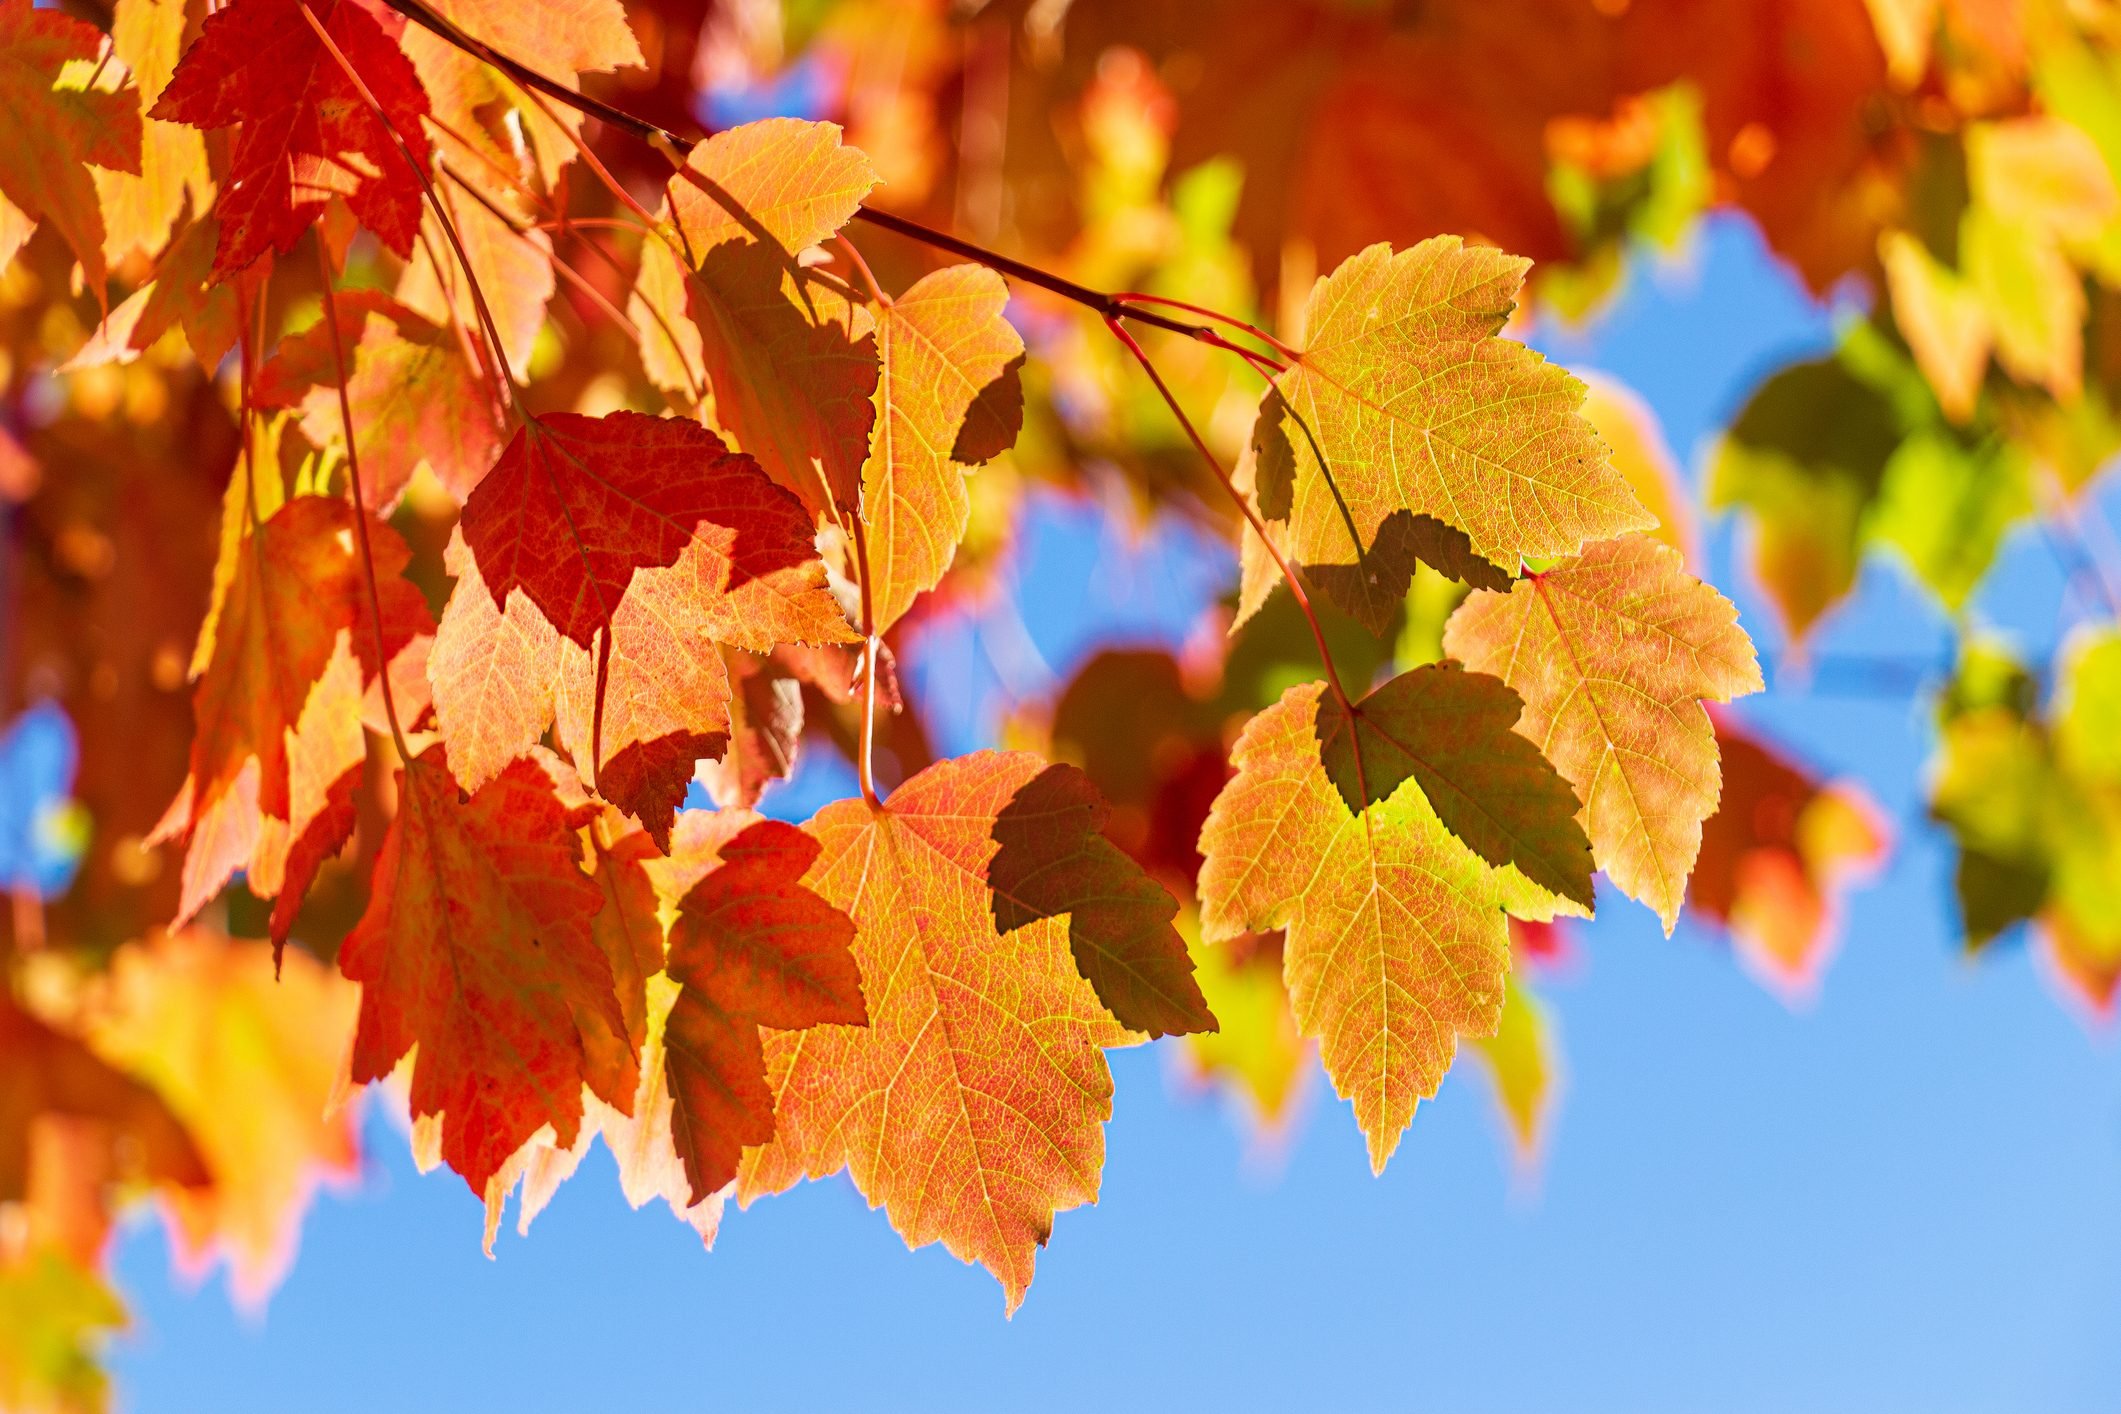 Autumn vs. Fall: Why Do Americans Say “Fall” Instead of “Autumn”?